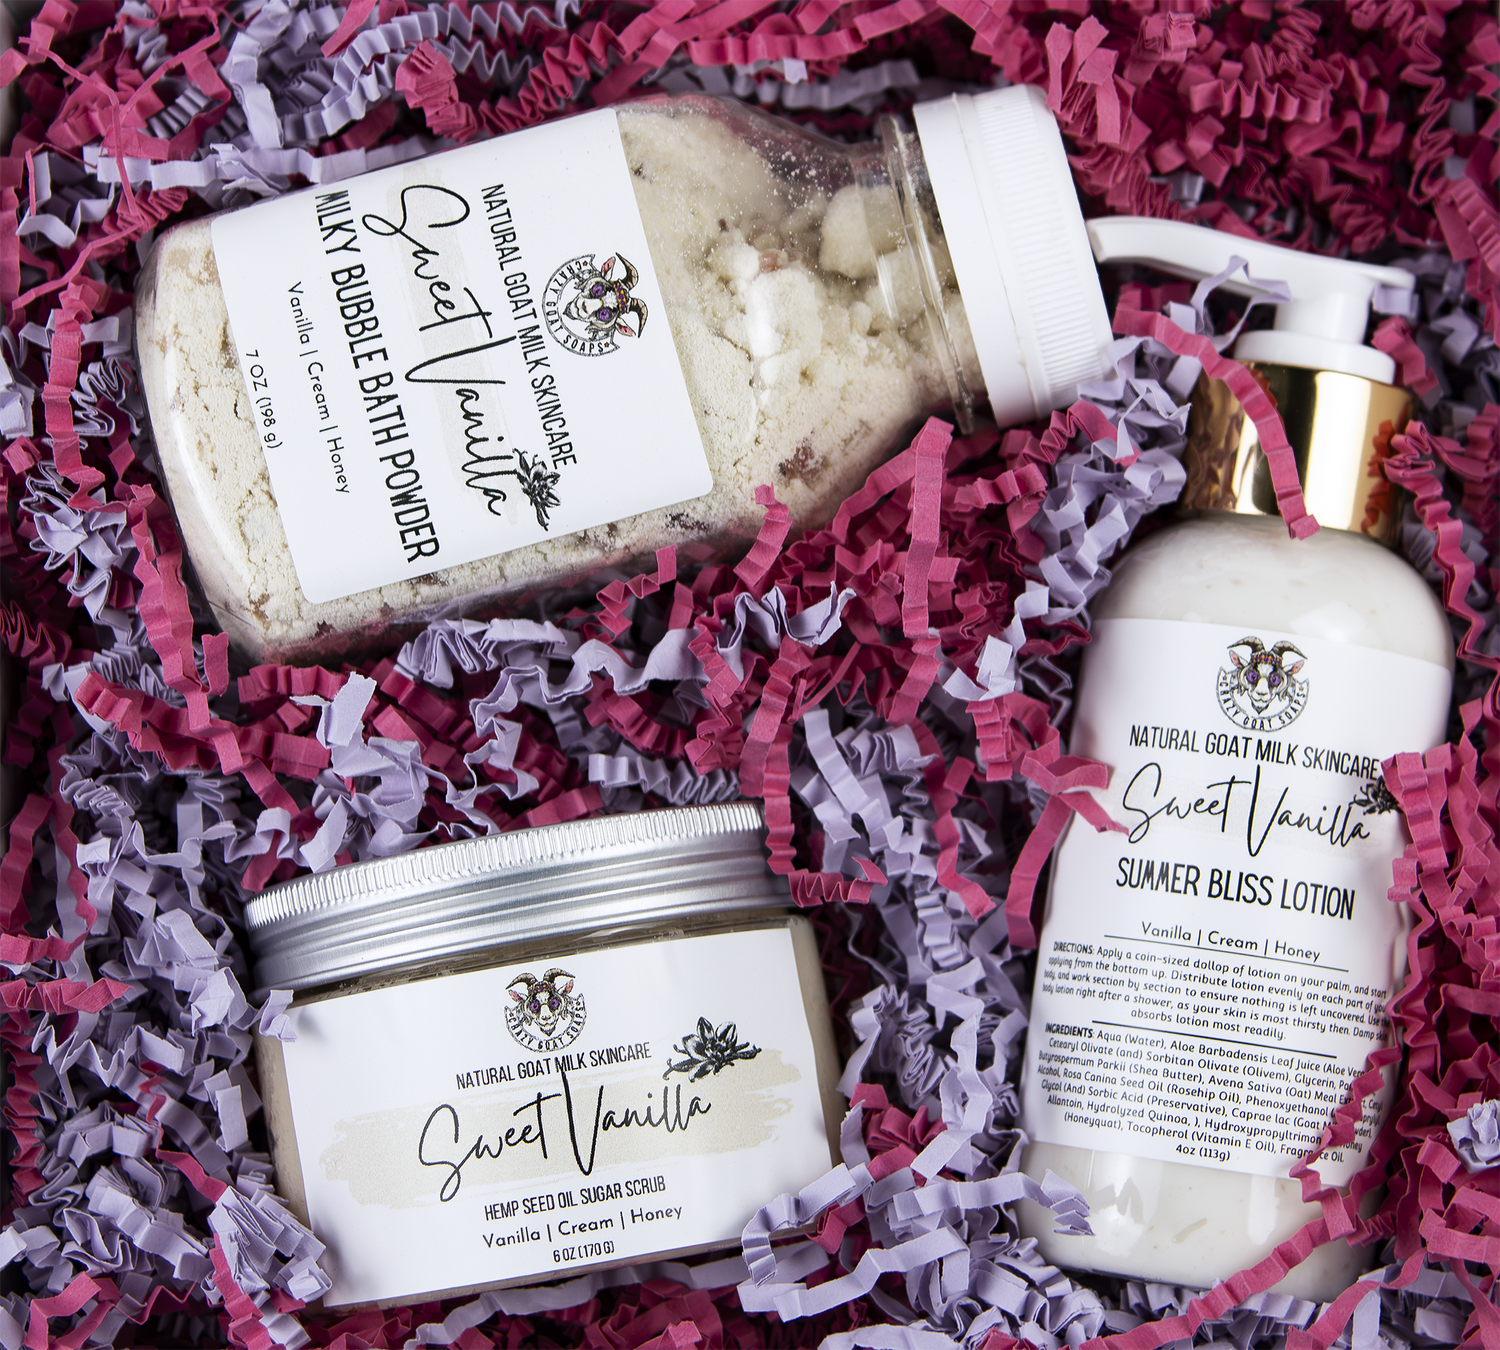 Crazy Goat Soaps' Luxury Gift Sets offer a pampering experience with goat milk lotion, goat milk bubble bath powder, and vegan sugar scrub, providing indulgent skincare essentials for a spa-like retreat at home.